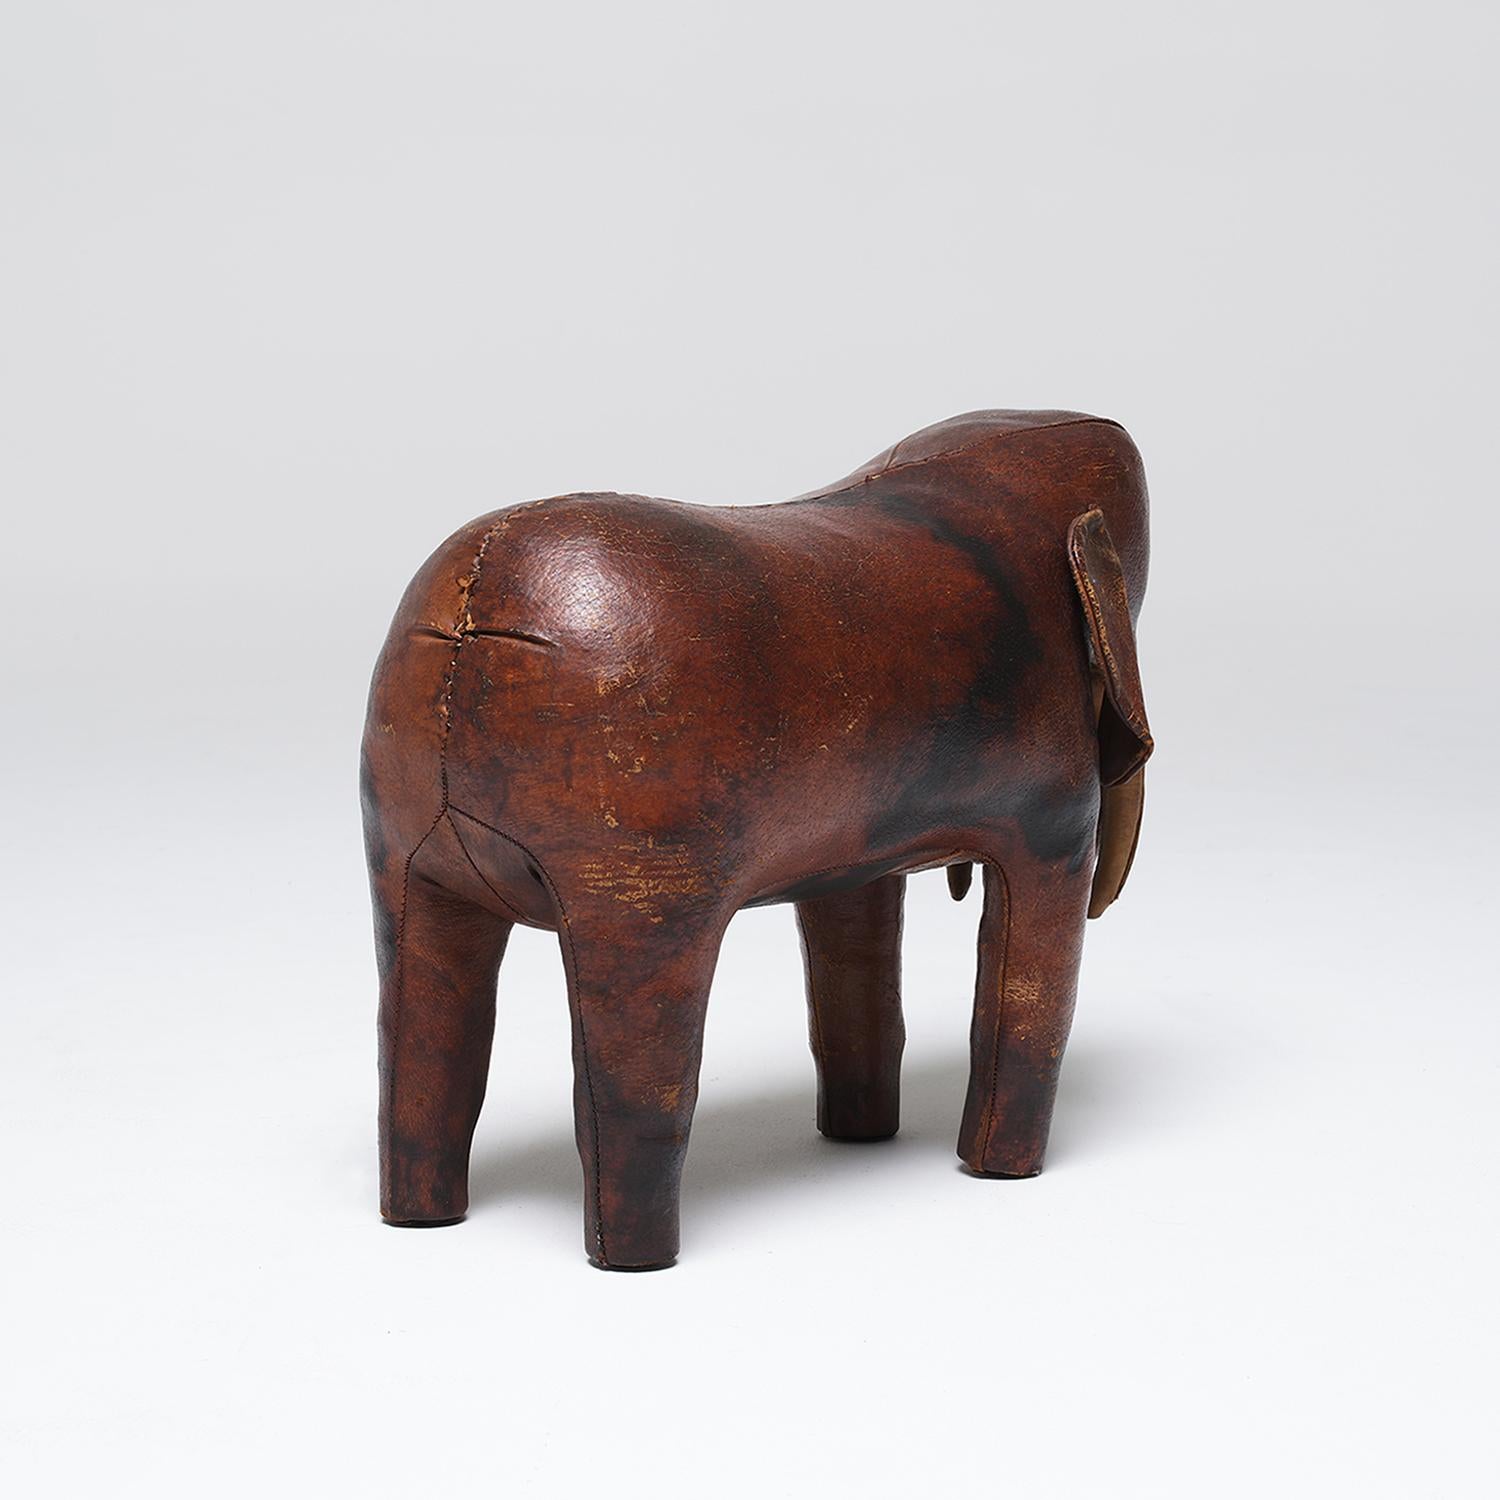 20th Century English Vintage Elephant Footstool by Dimitri Omersa For Sale 4